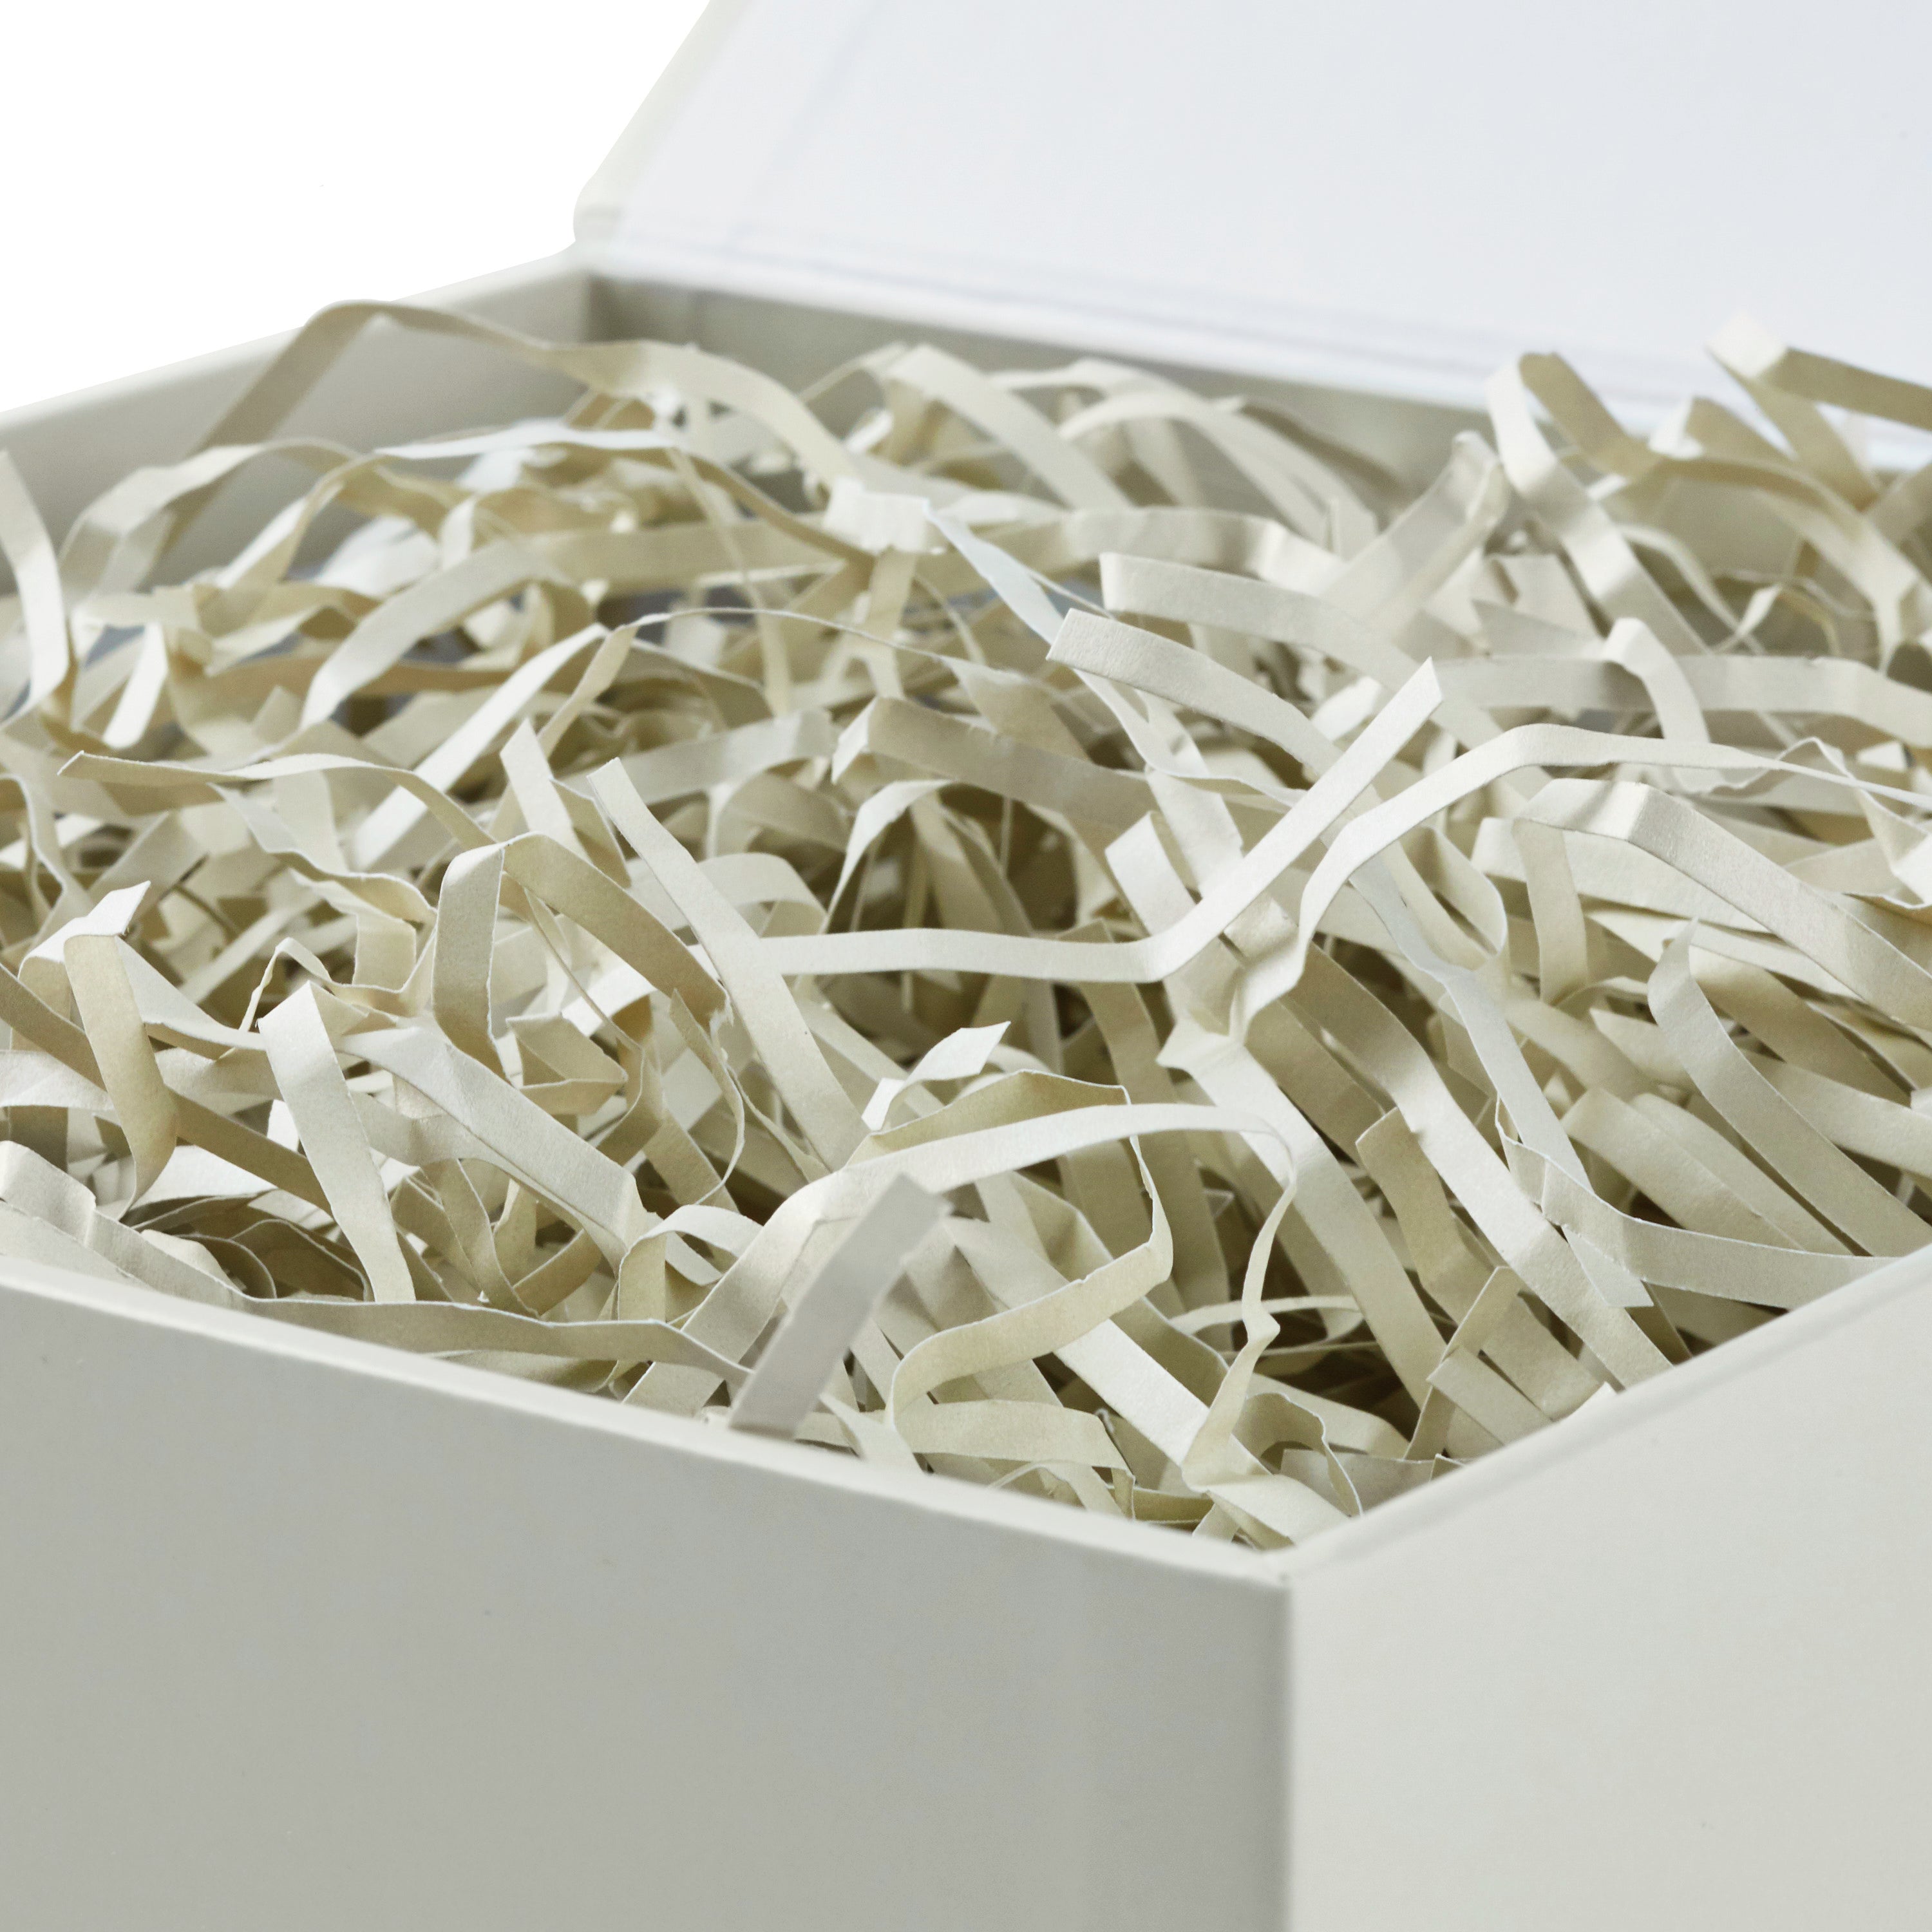 7" Large White Gift Box with Lid and Shredded Paper Fill for Weddings, Christmas, Holidays, Birthdays and More